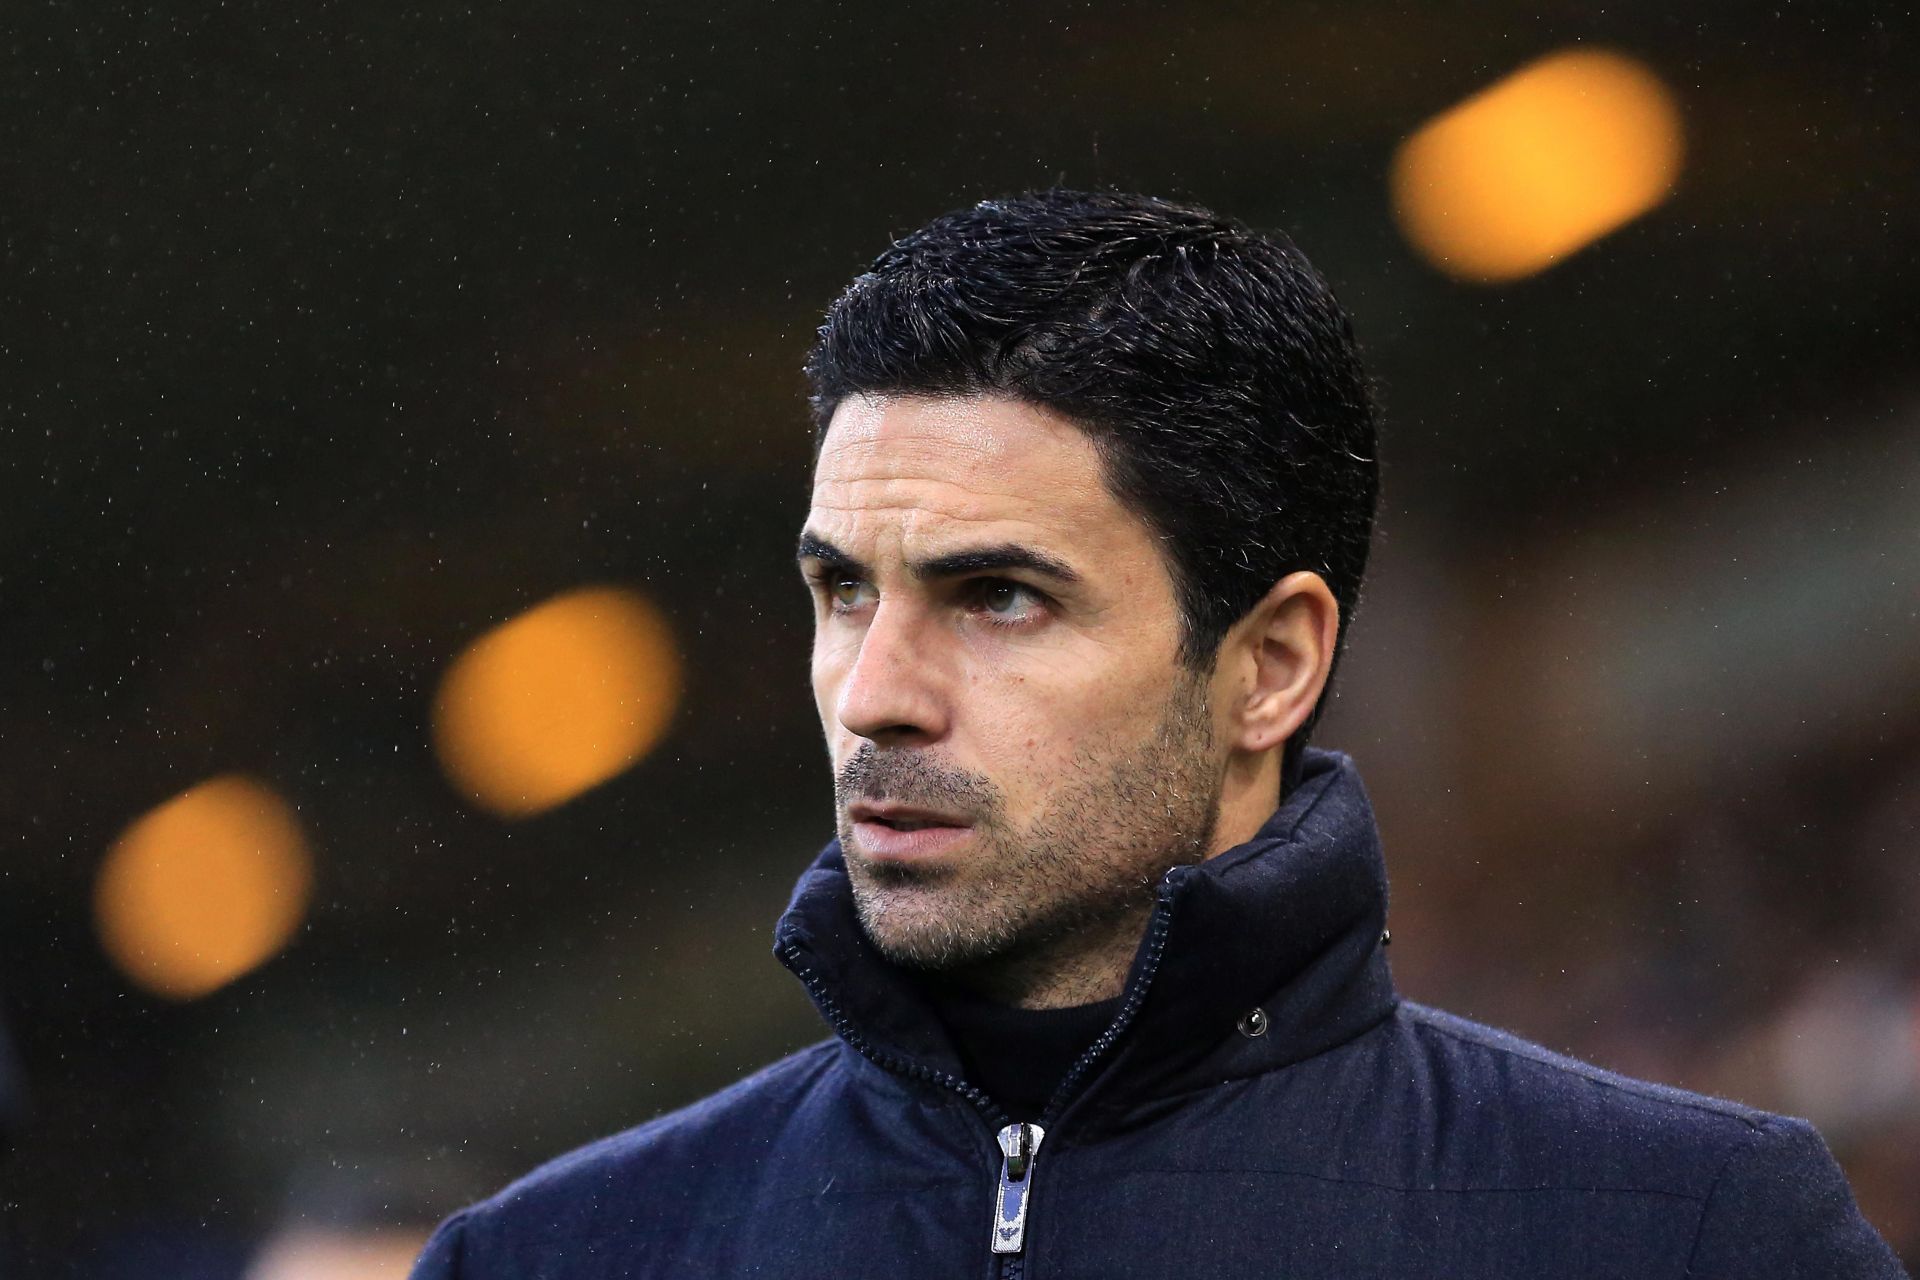 Arsenal manager Mikel Arteta is preparing to face Liverpool.